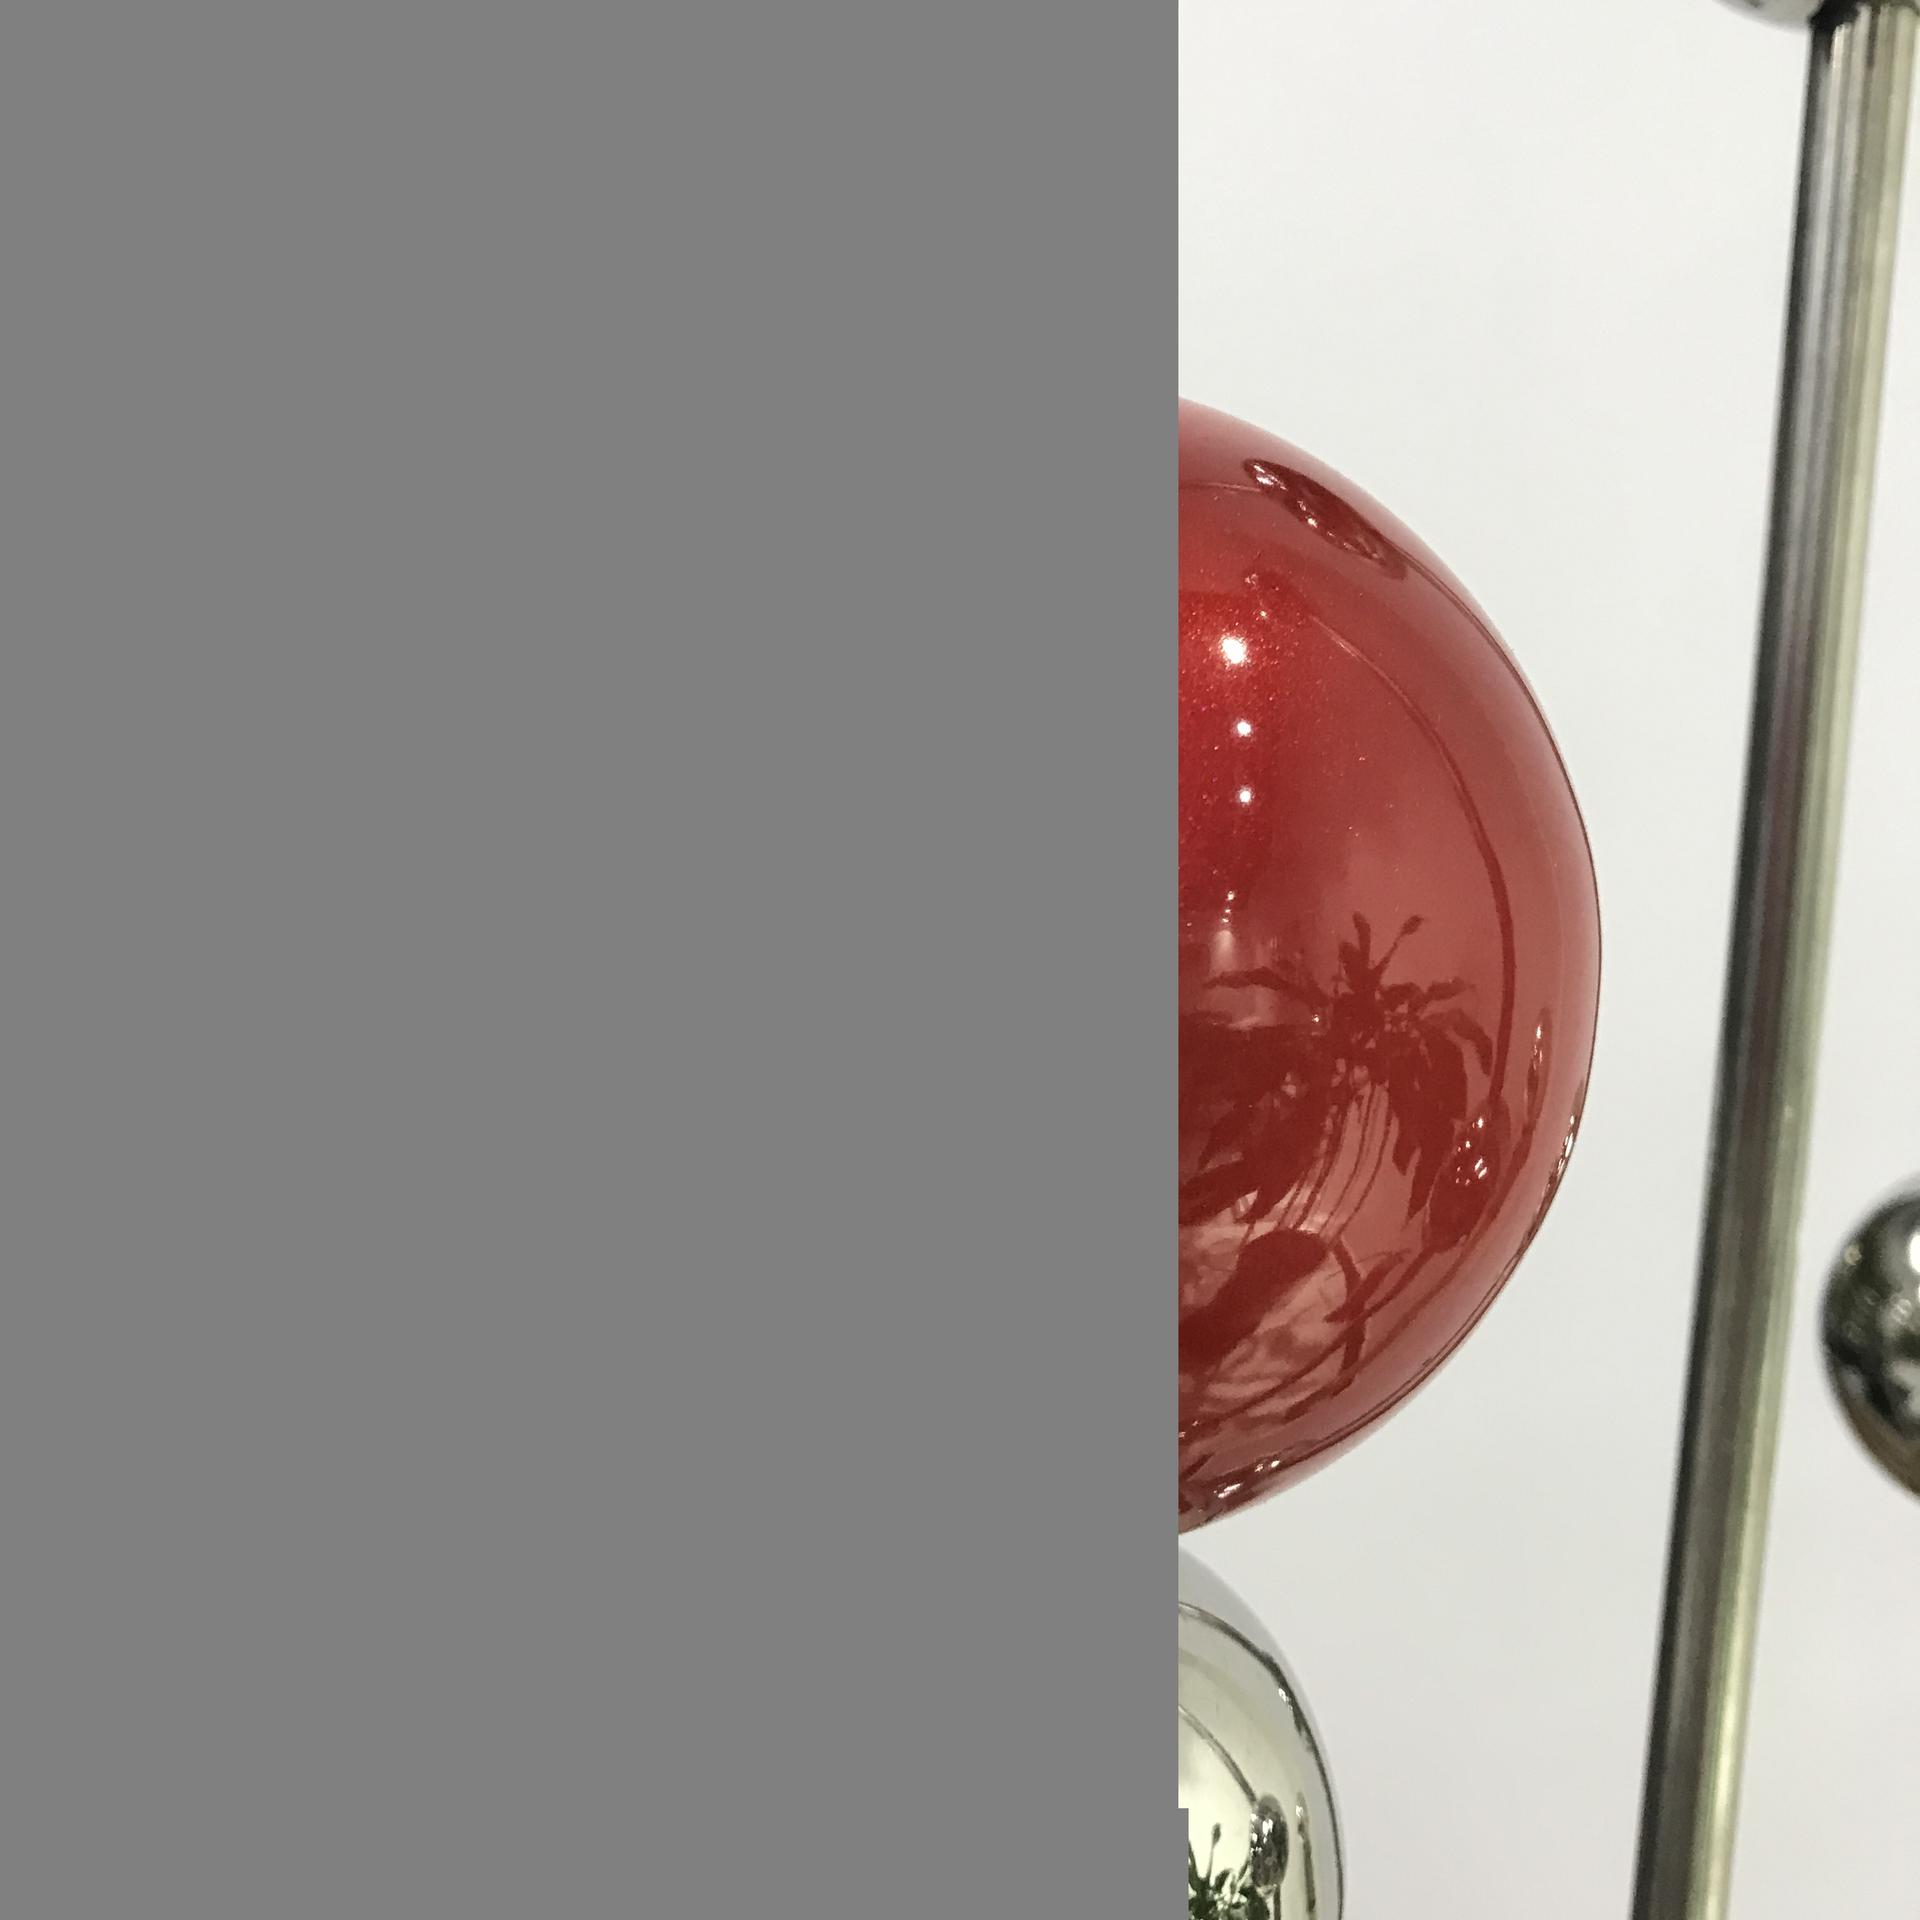 Large Stainless SteelBaubles Christmas Ball color balls